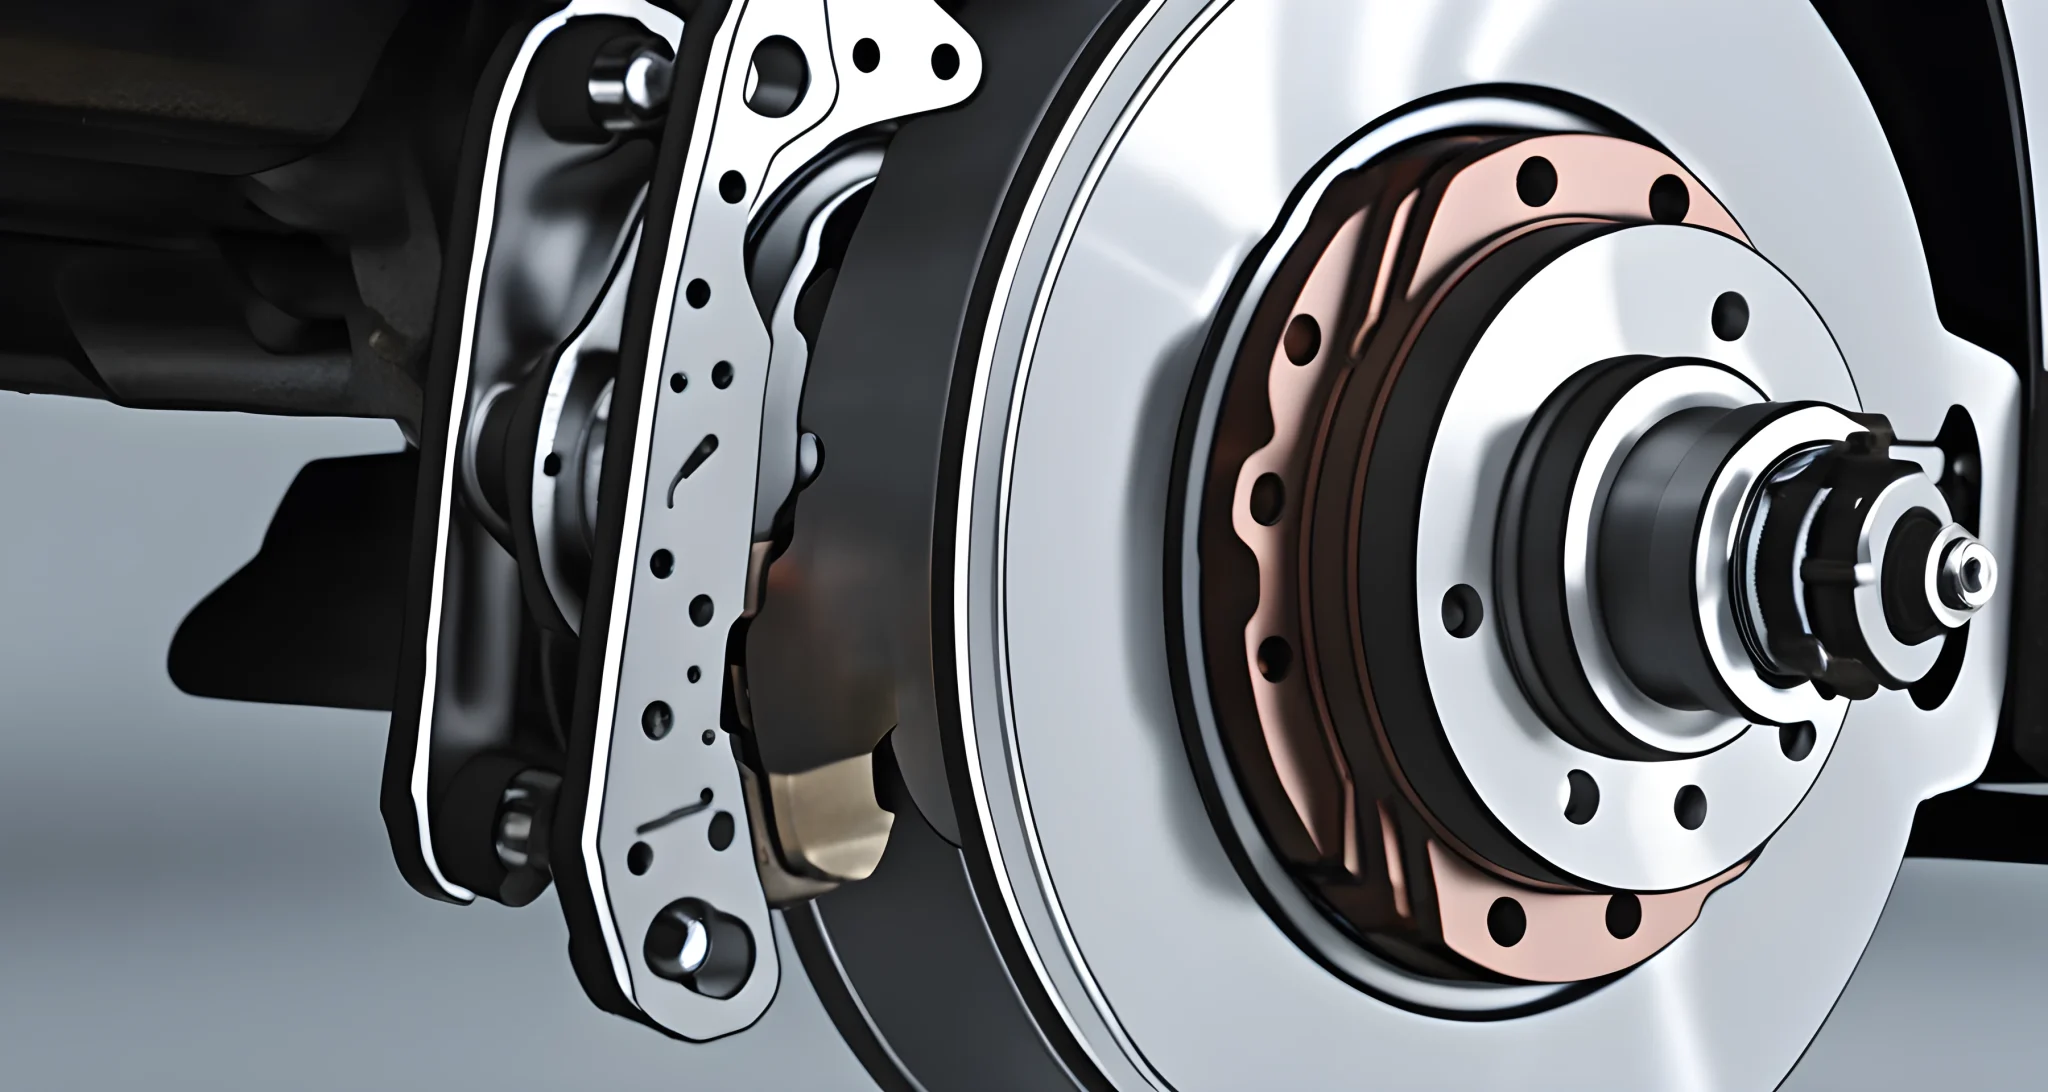 The image shows a close-up of a car's brake system, including the brake pads, calipers, and rotors.